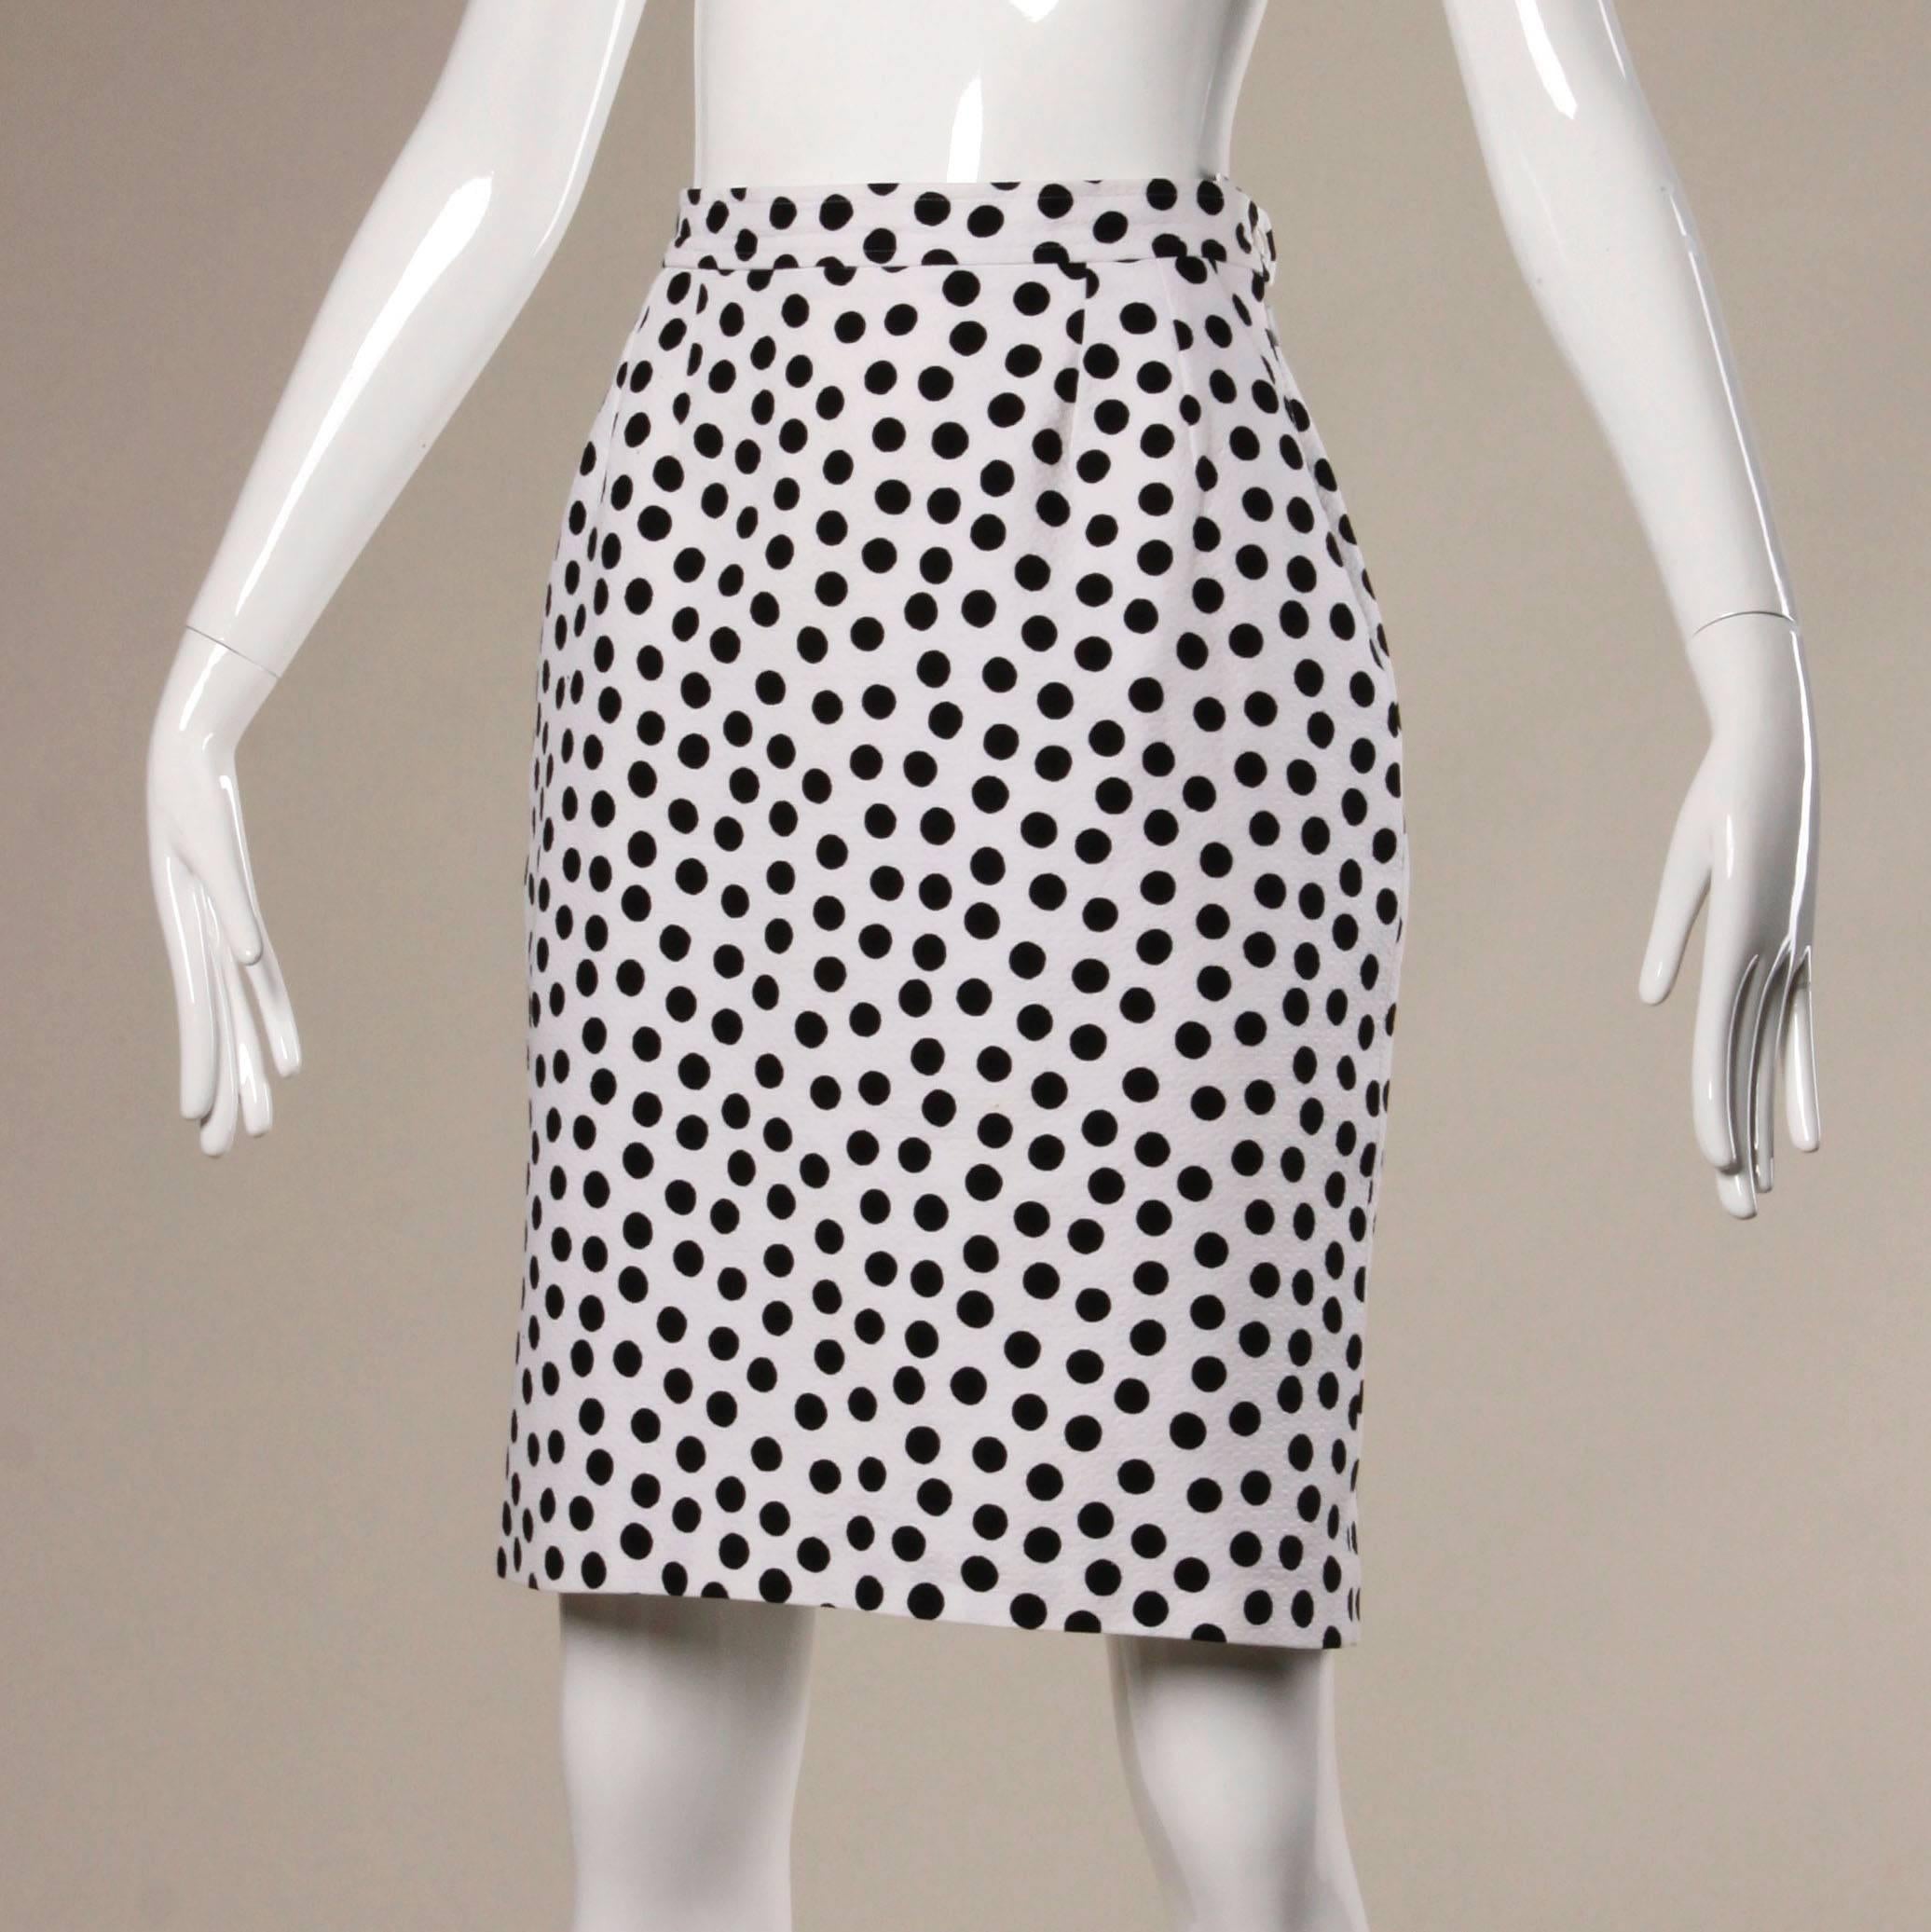 Darling black and white vintage polka dot skirt by Yves Saint Laurent Rive Gauche.

Details:

Fully Lined
Side Pockets
Side Zip and Button Closure 
Marked Size: F 42
Estimated Size: Medium
Color: Black/ White
Fabric: 100% Cotton
Label: